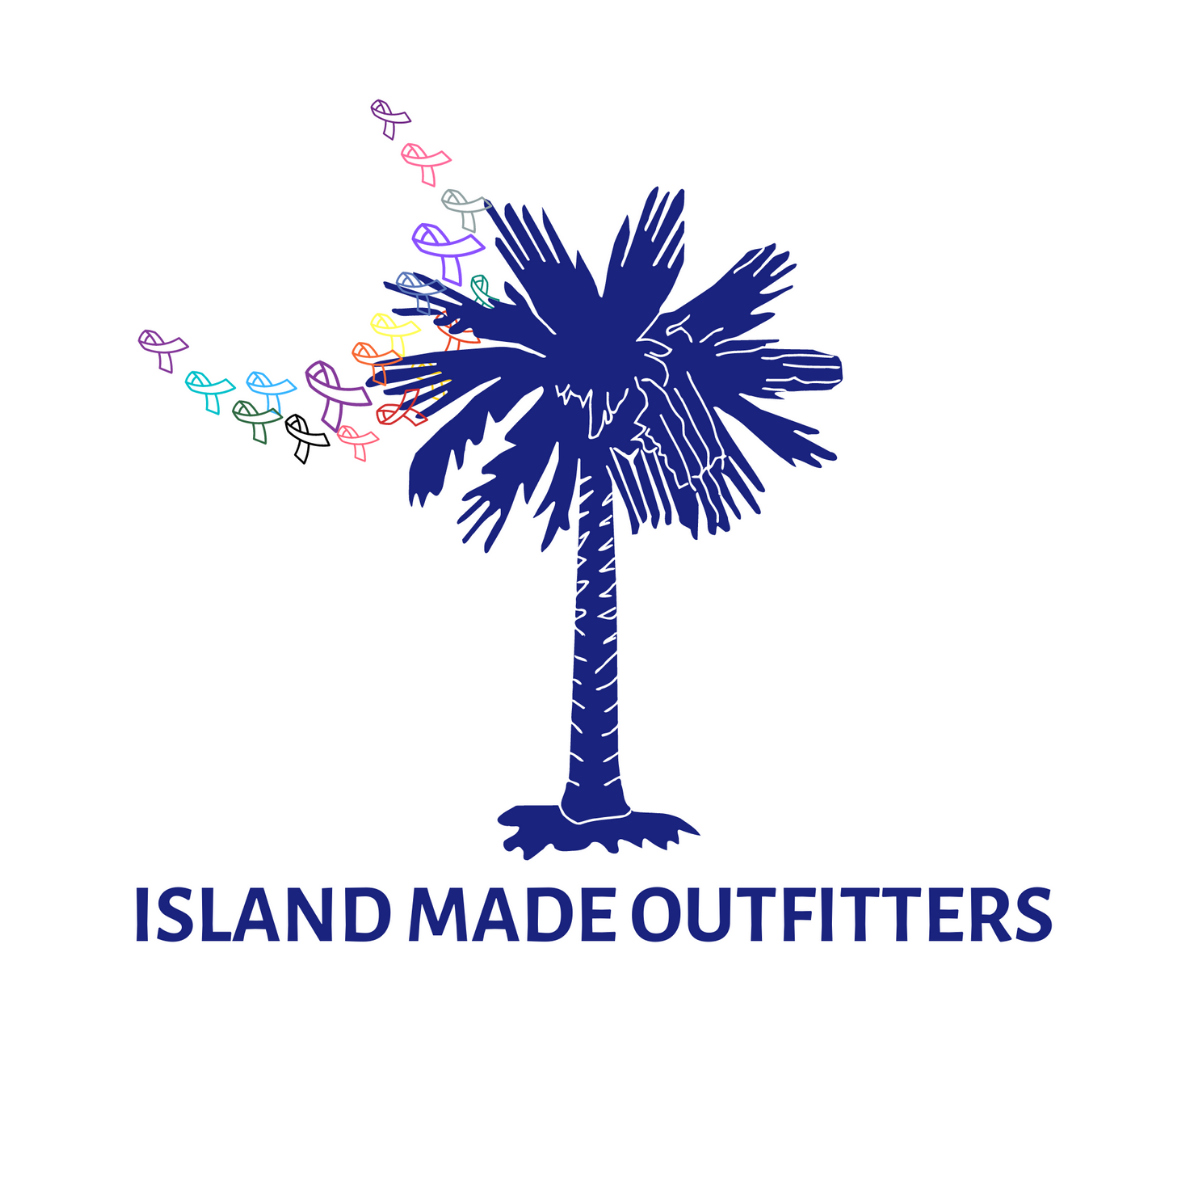 ISLAND MADE OUTFITTERS